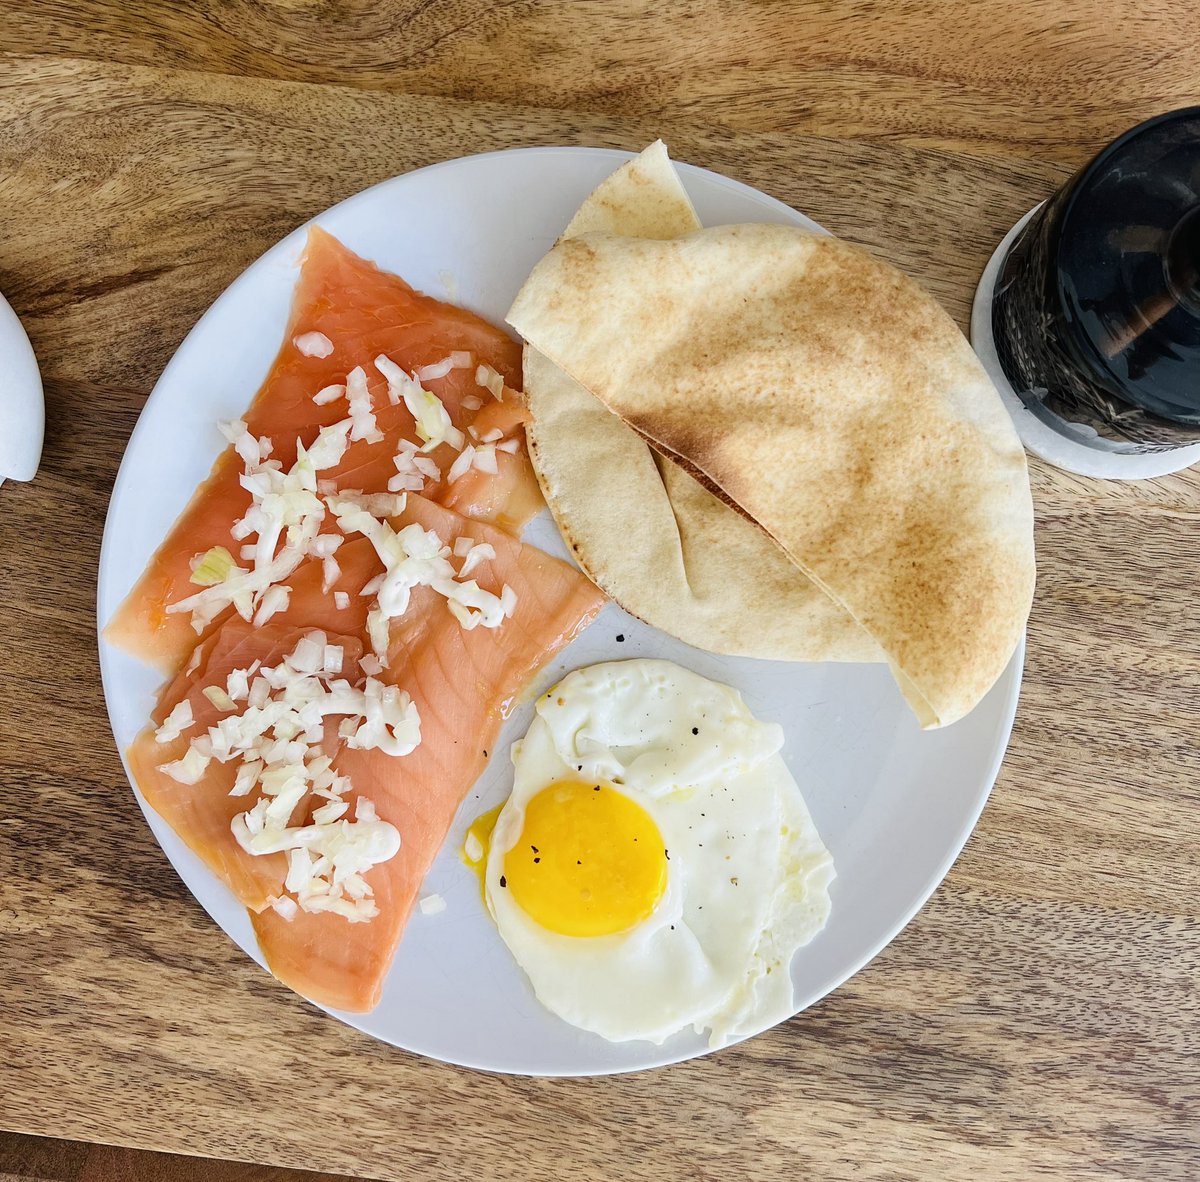 Happy #Sunday! Smoked Salmon, finely chopped onions, truffle mayo, egg sunny side up served with Arabic bread. #weekend #MotherDay #foodie